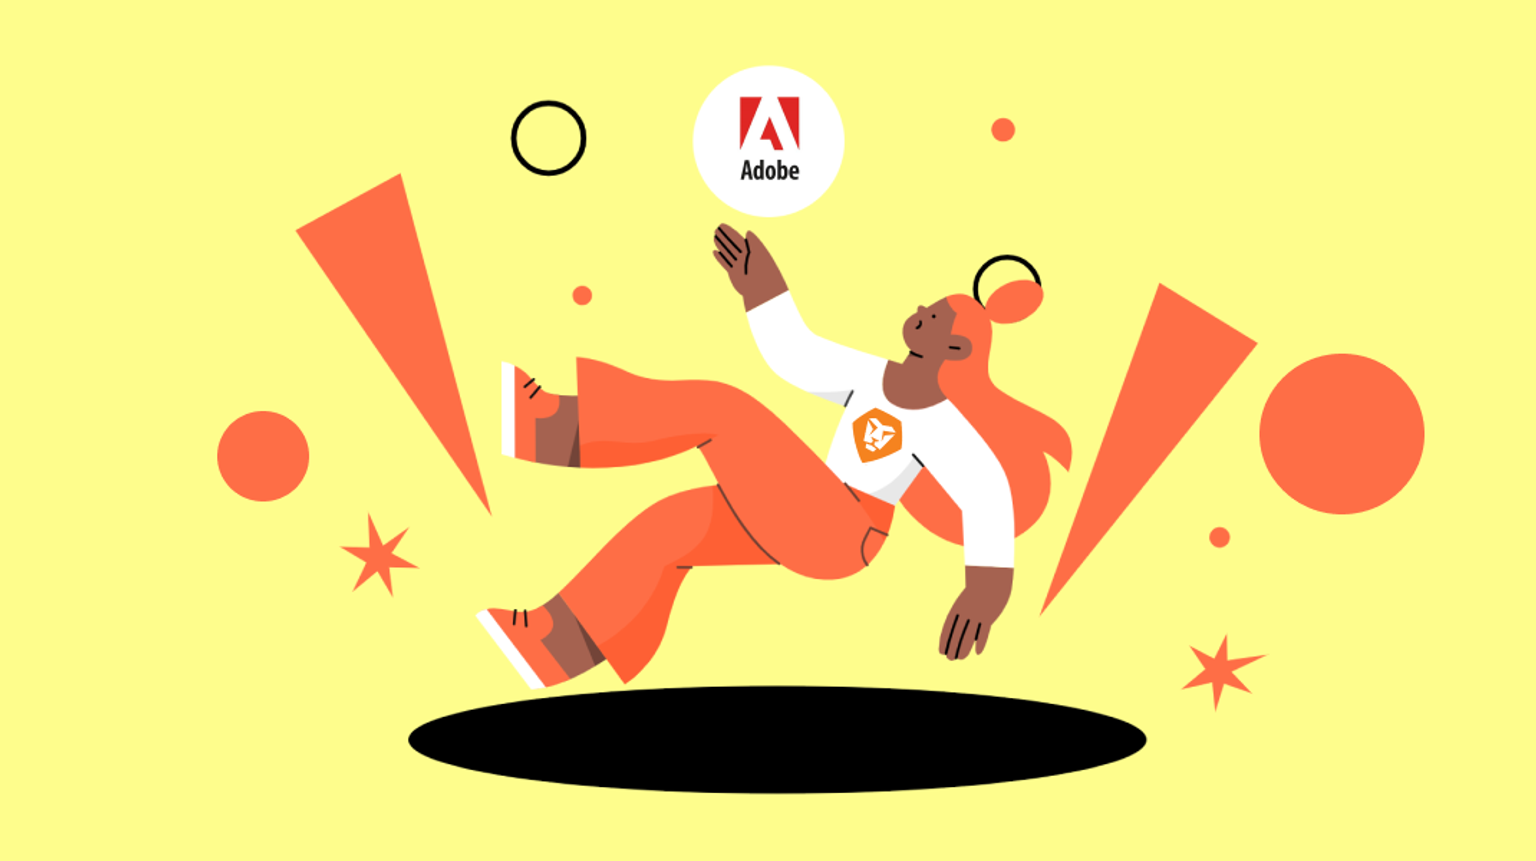 Why Adobe’s acquisition of Workfront will kill creativity in marketing